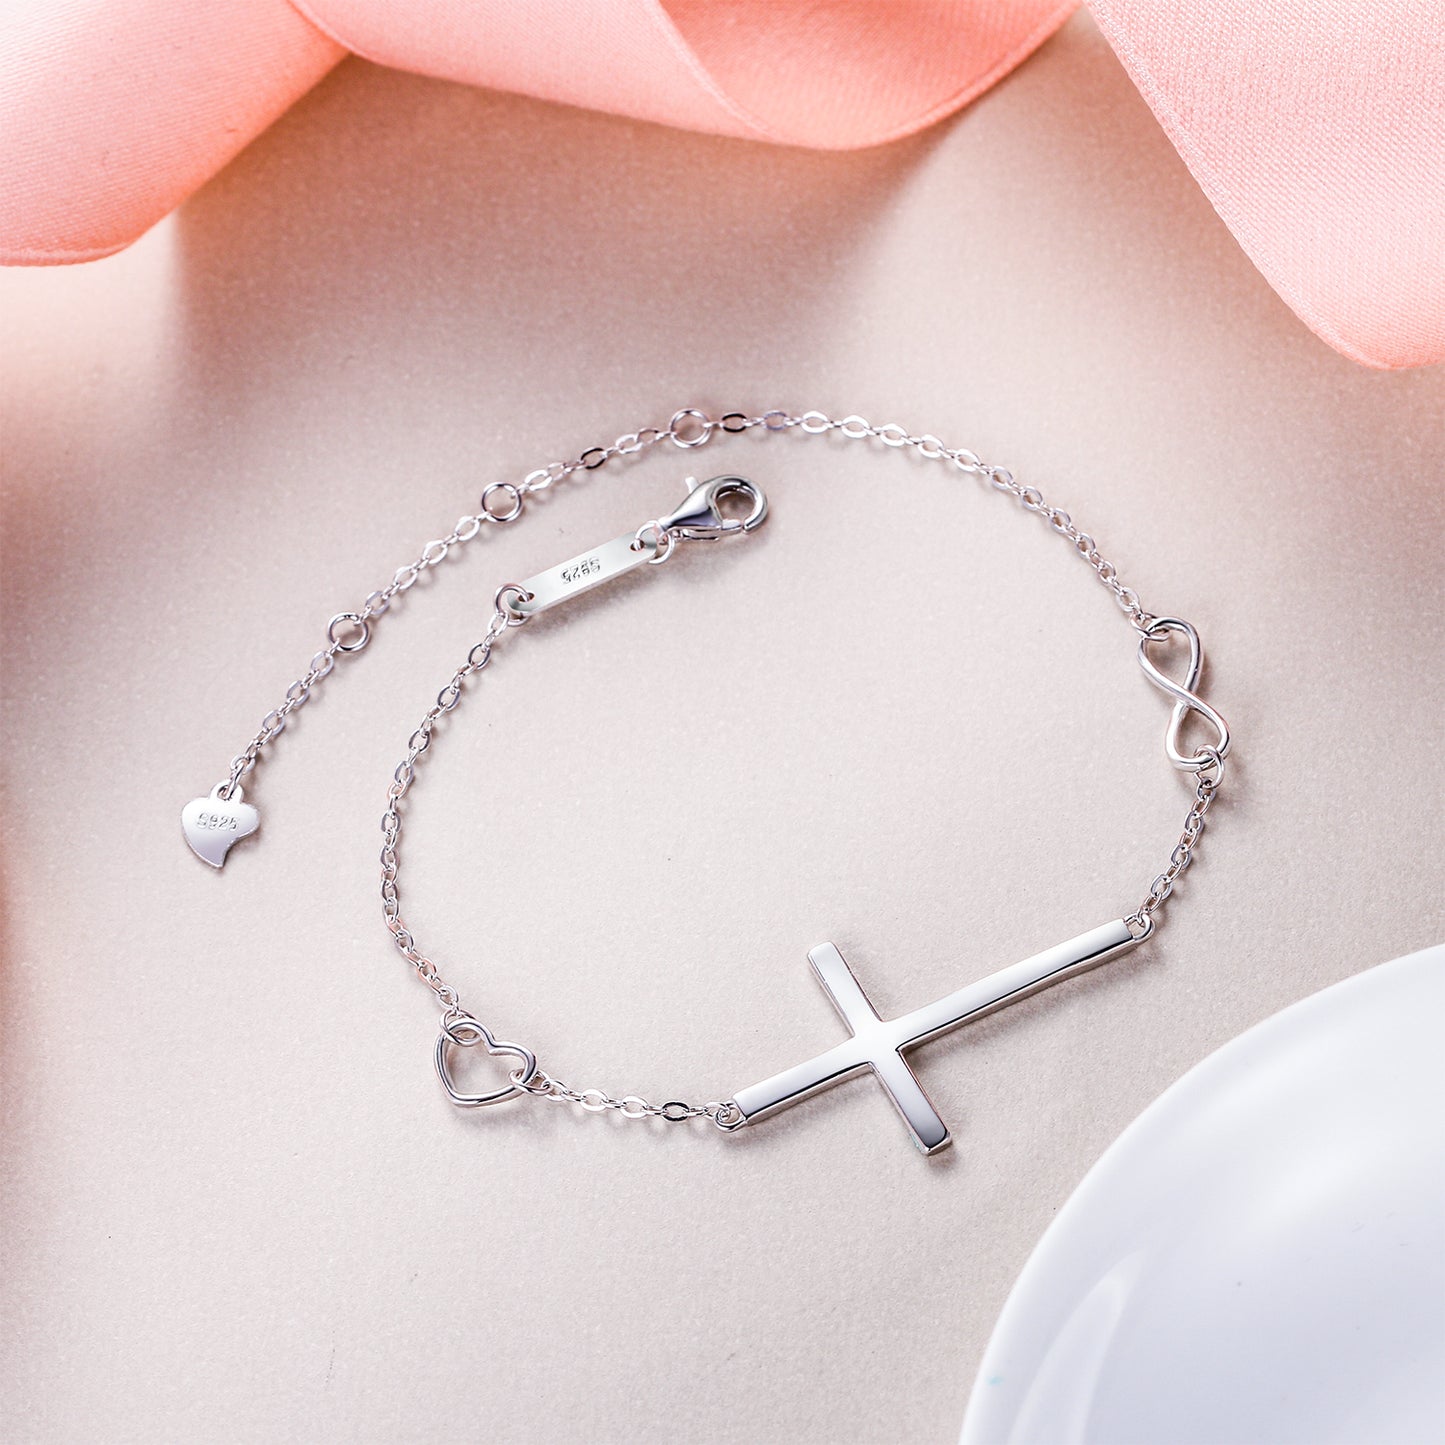 10885 925 Sterling Silver Religious Classic Heart Infinity Charm Cross Bracelets